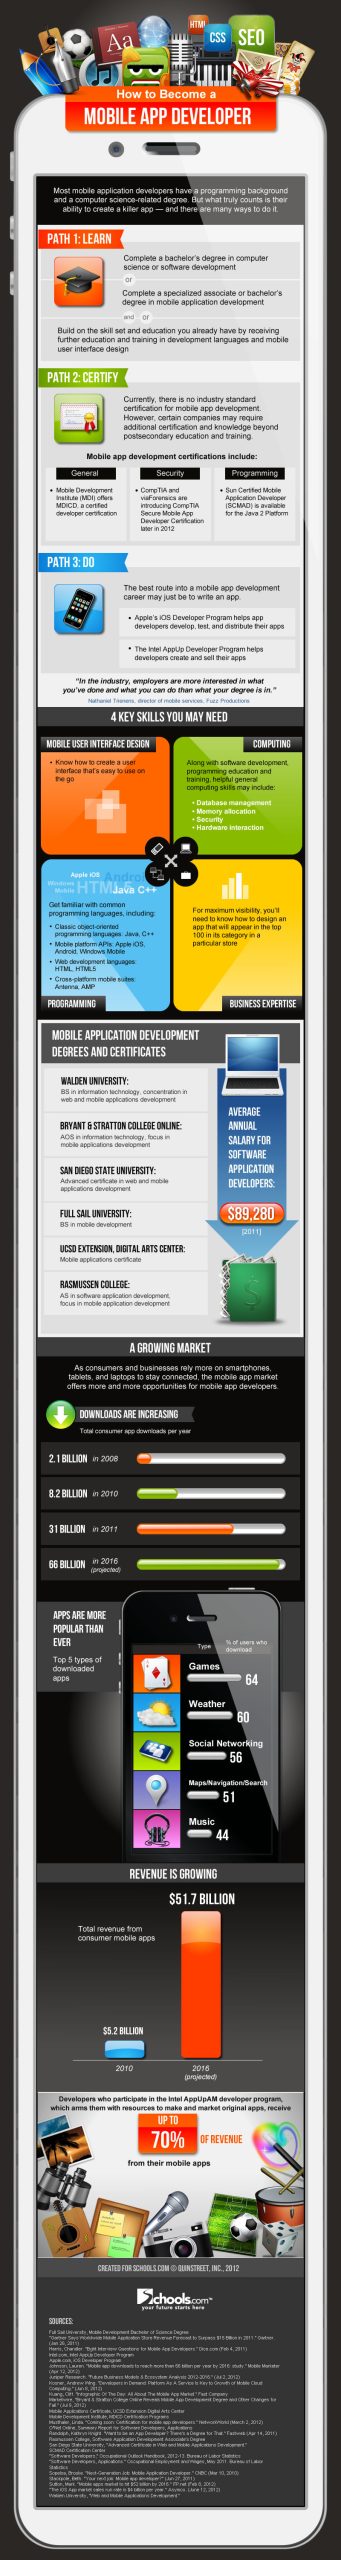 Infographic: How to Become a Mobile App Developer